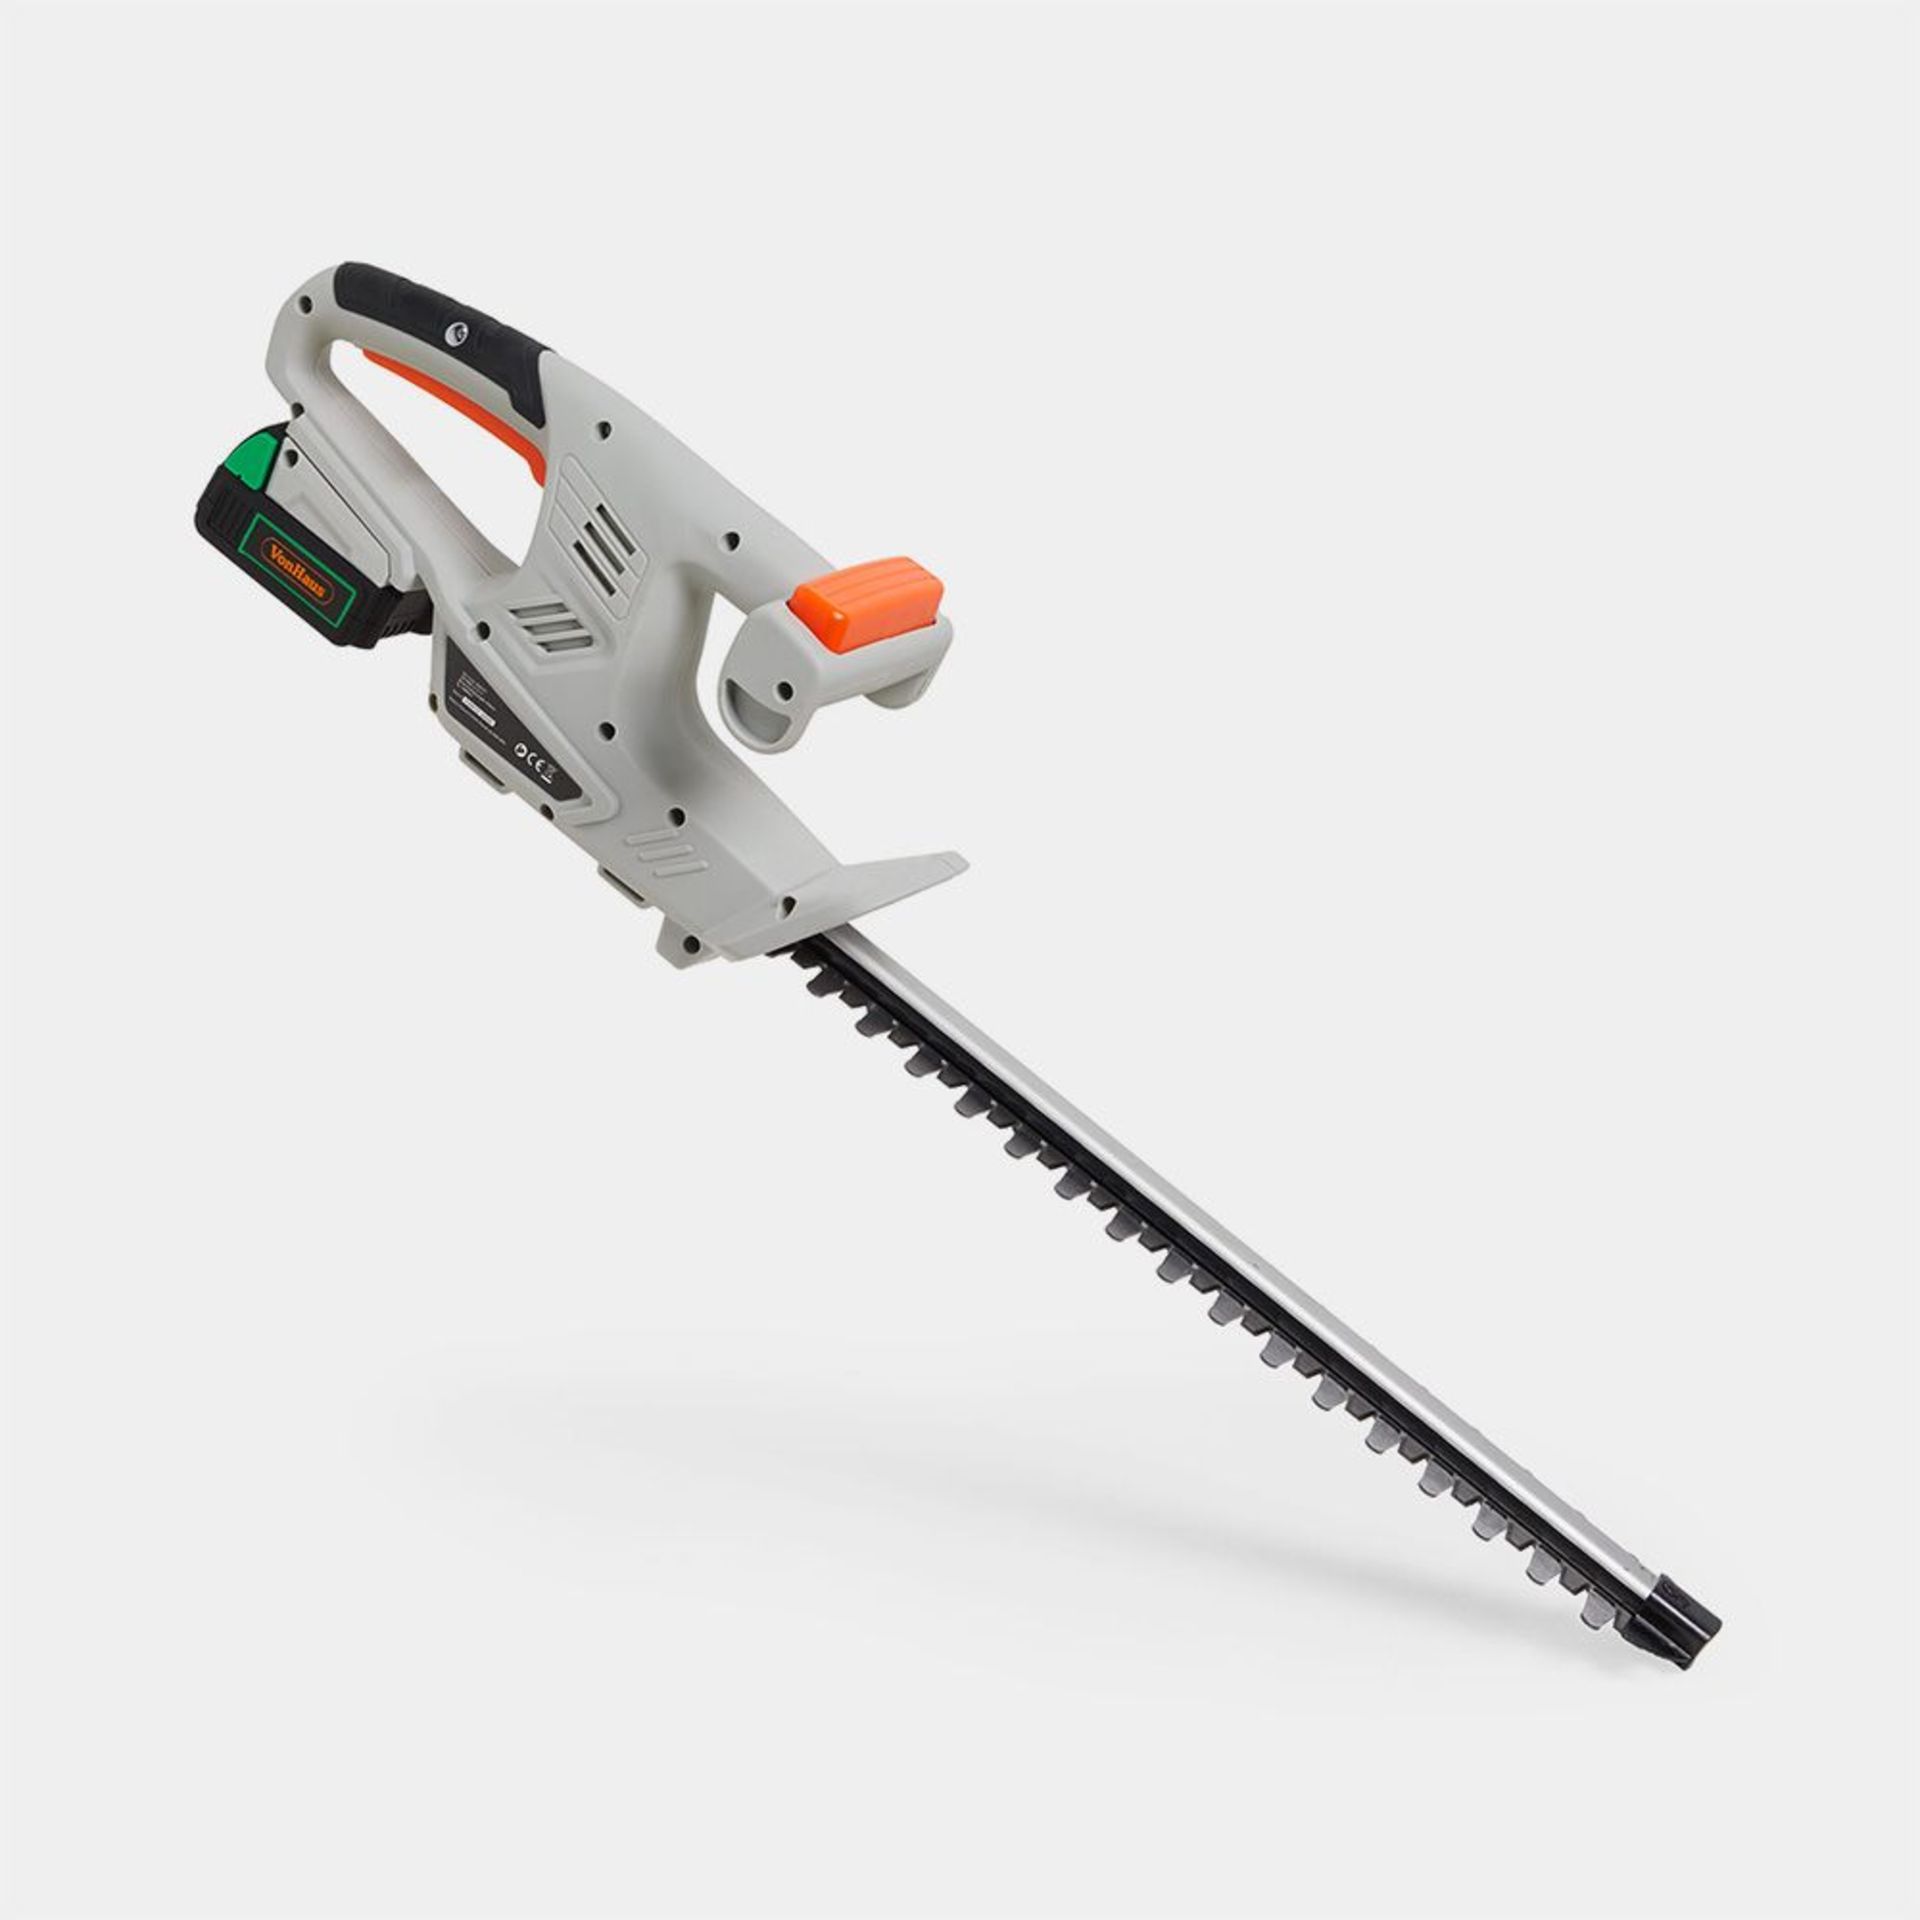 F-Series Cordless Hedge Trimmer. - BI. For those with smaller gardens, our 12V Max Hedge Trimmer